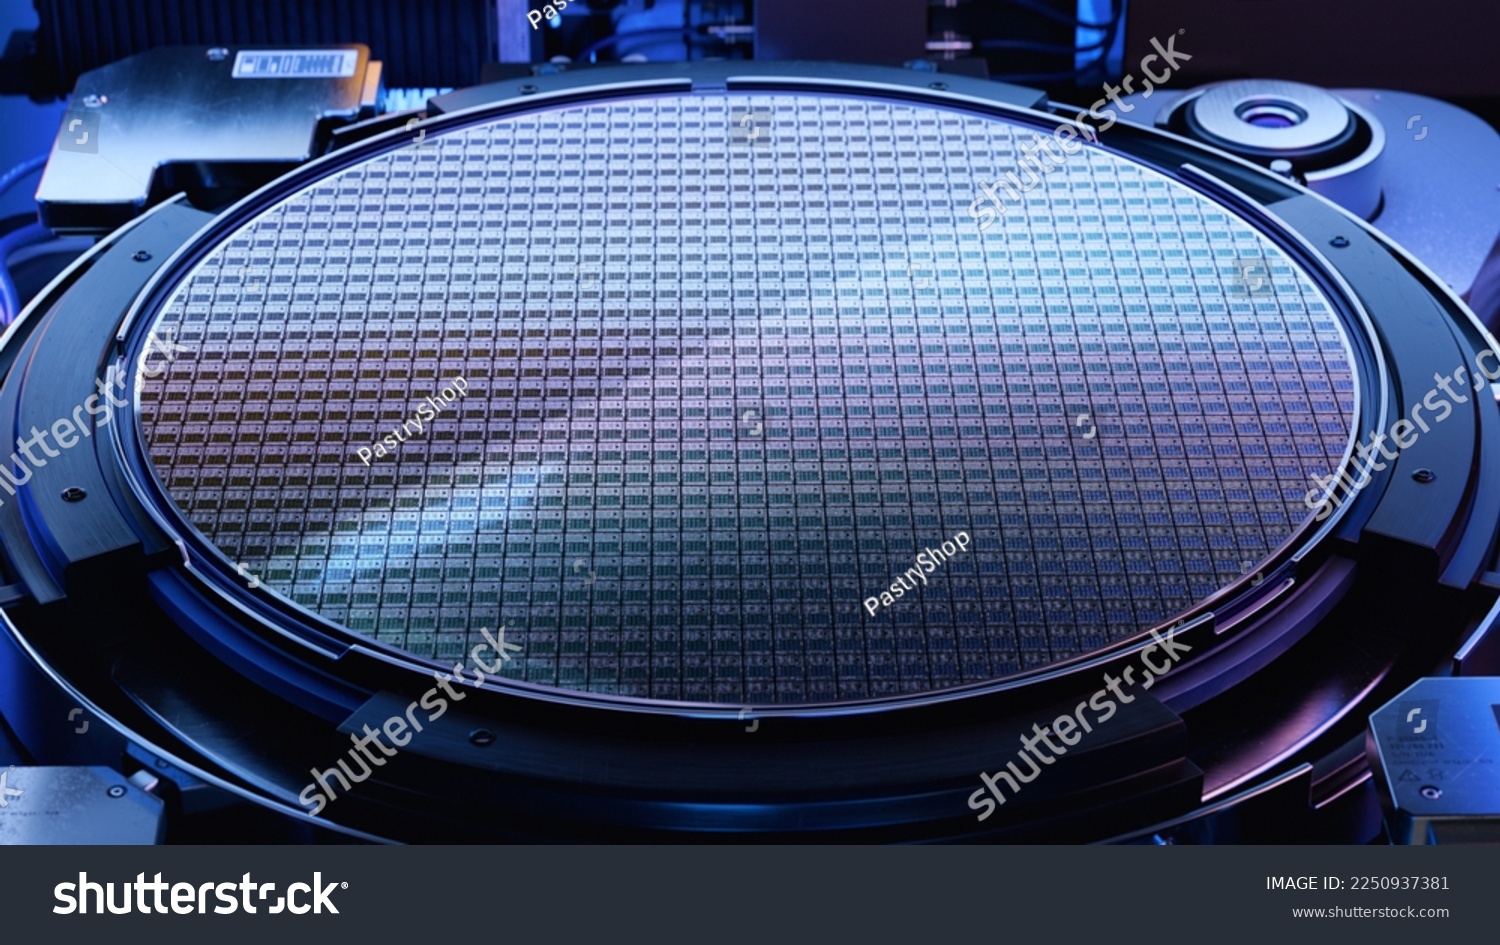 Front View of Silicon Wafer during Photolithography Process inside Complex Computer Chip Production Machine. Semiconductor Manufacturing at Fab or Foundry. #2250937381